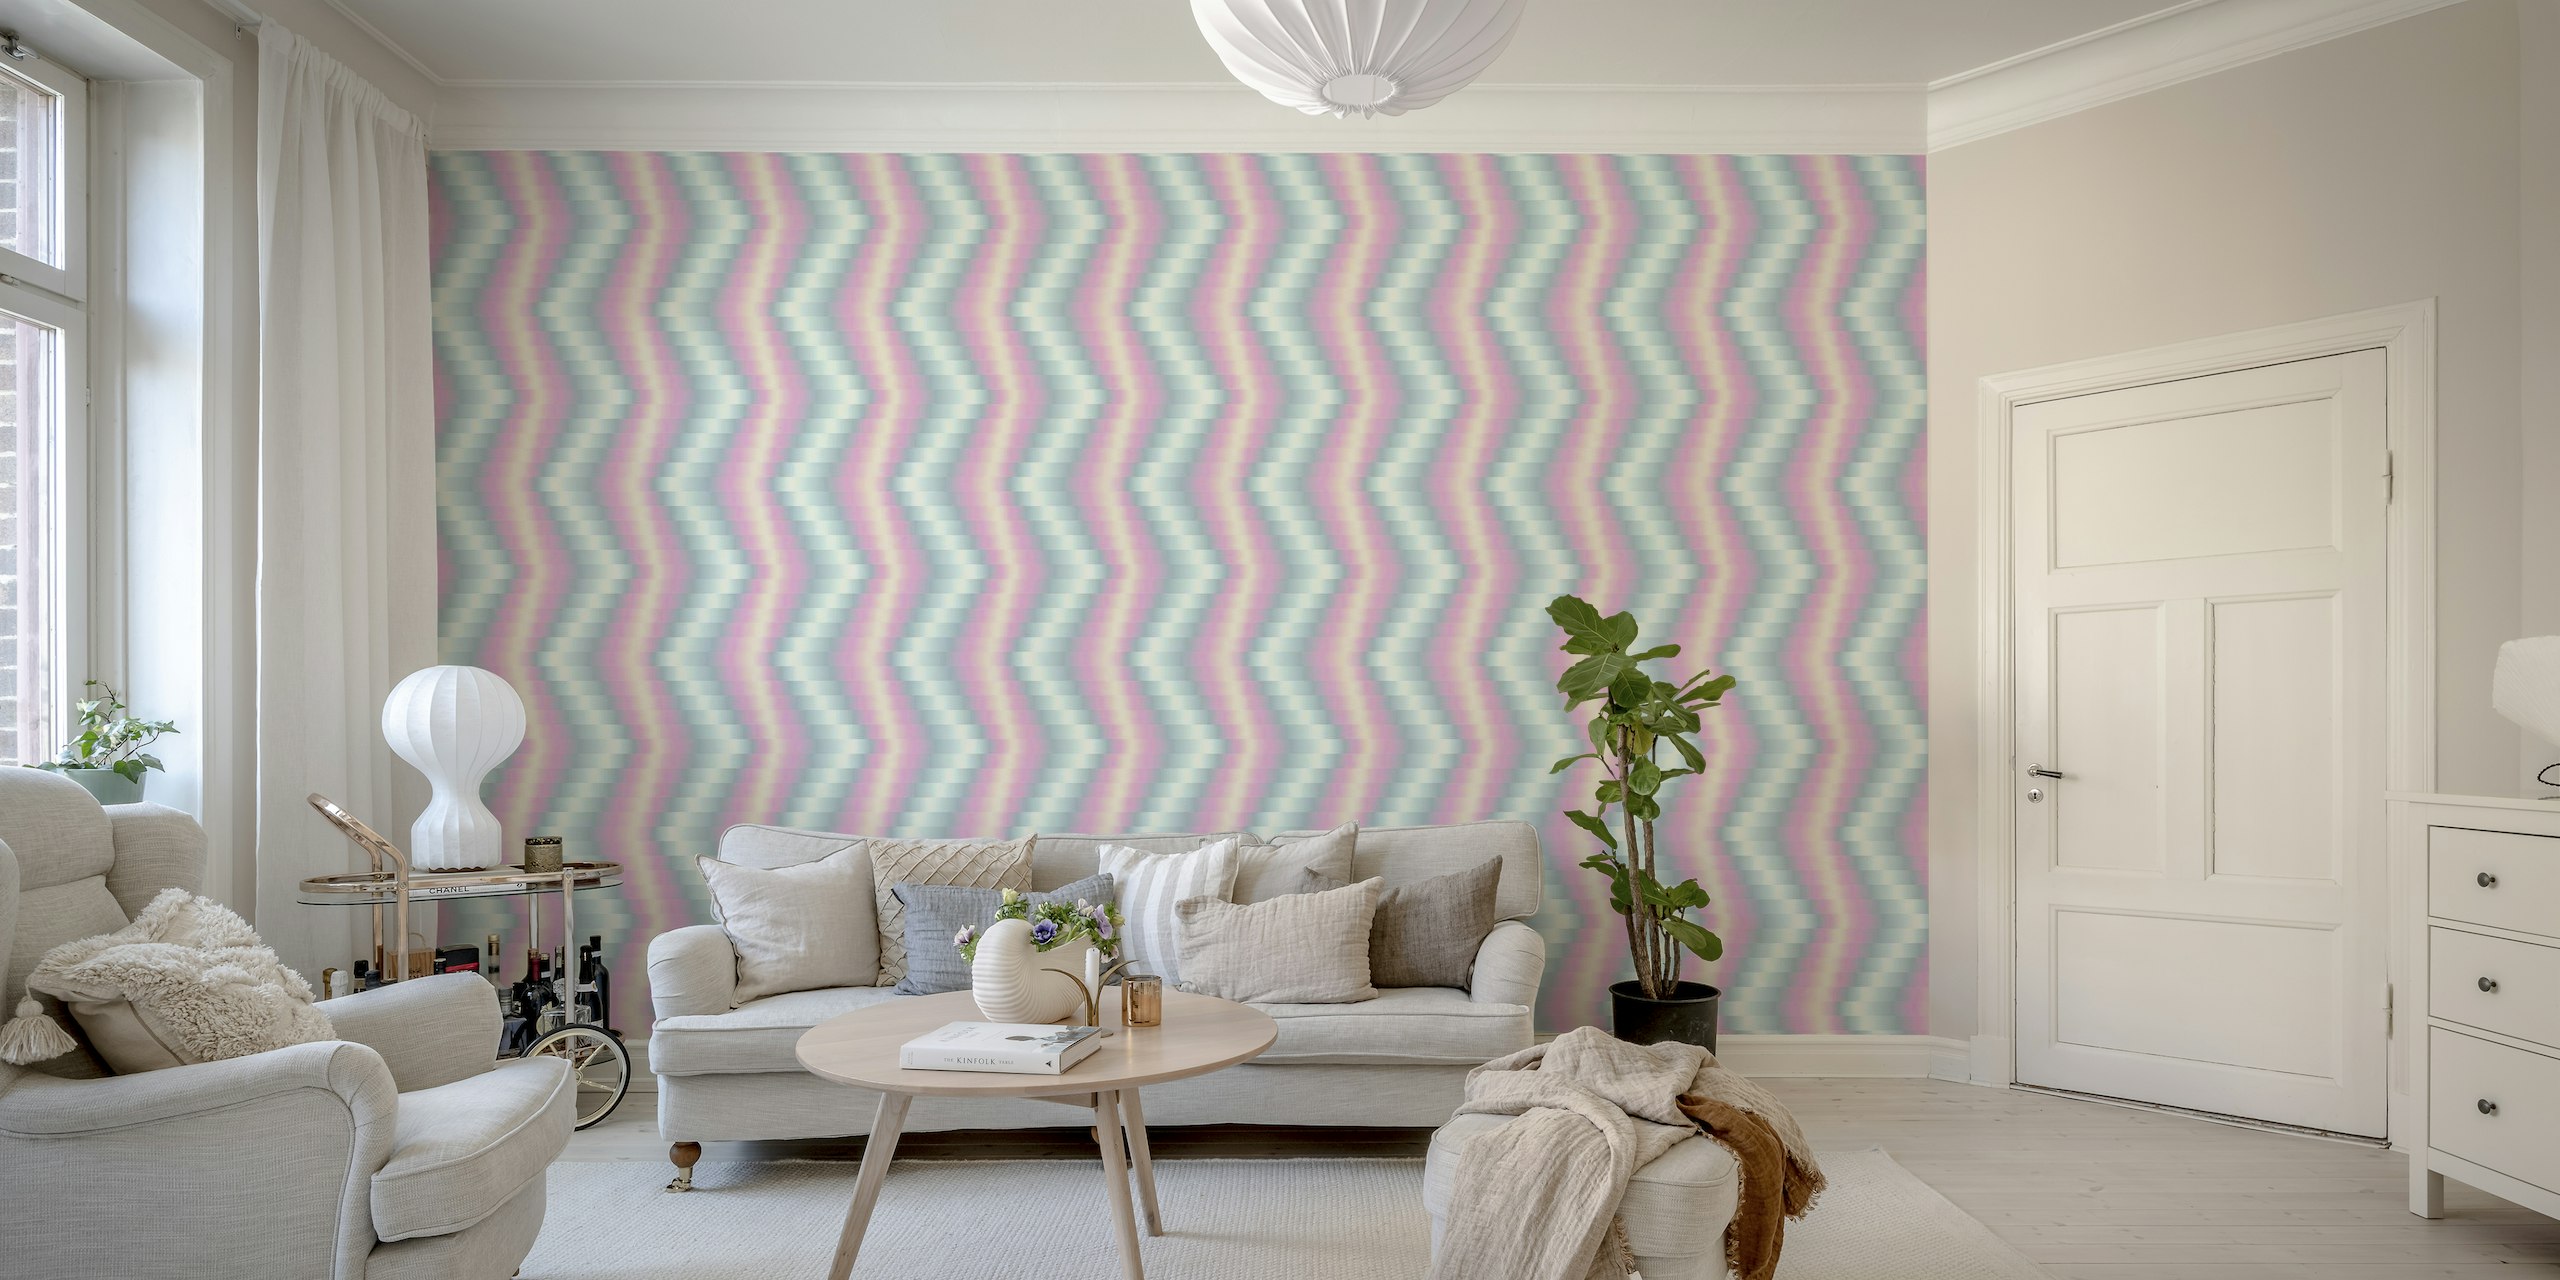 Blurred holographic Zigzag wallpaper